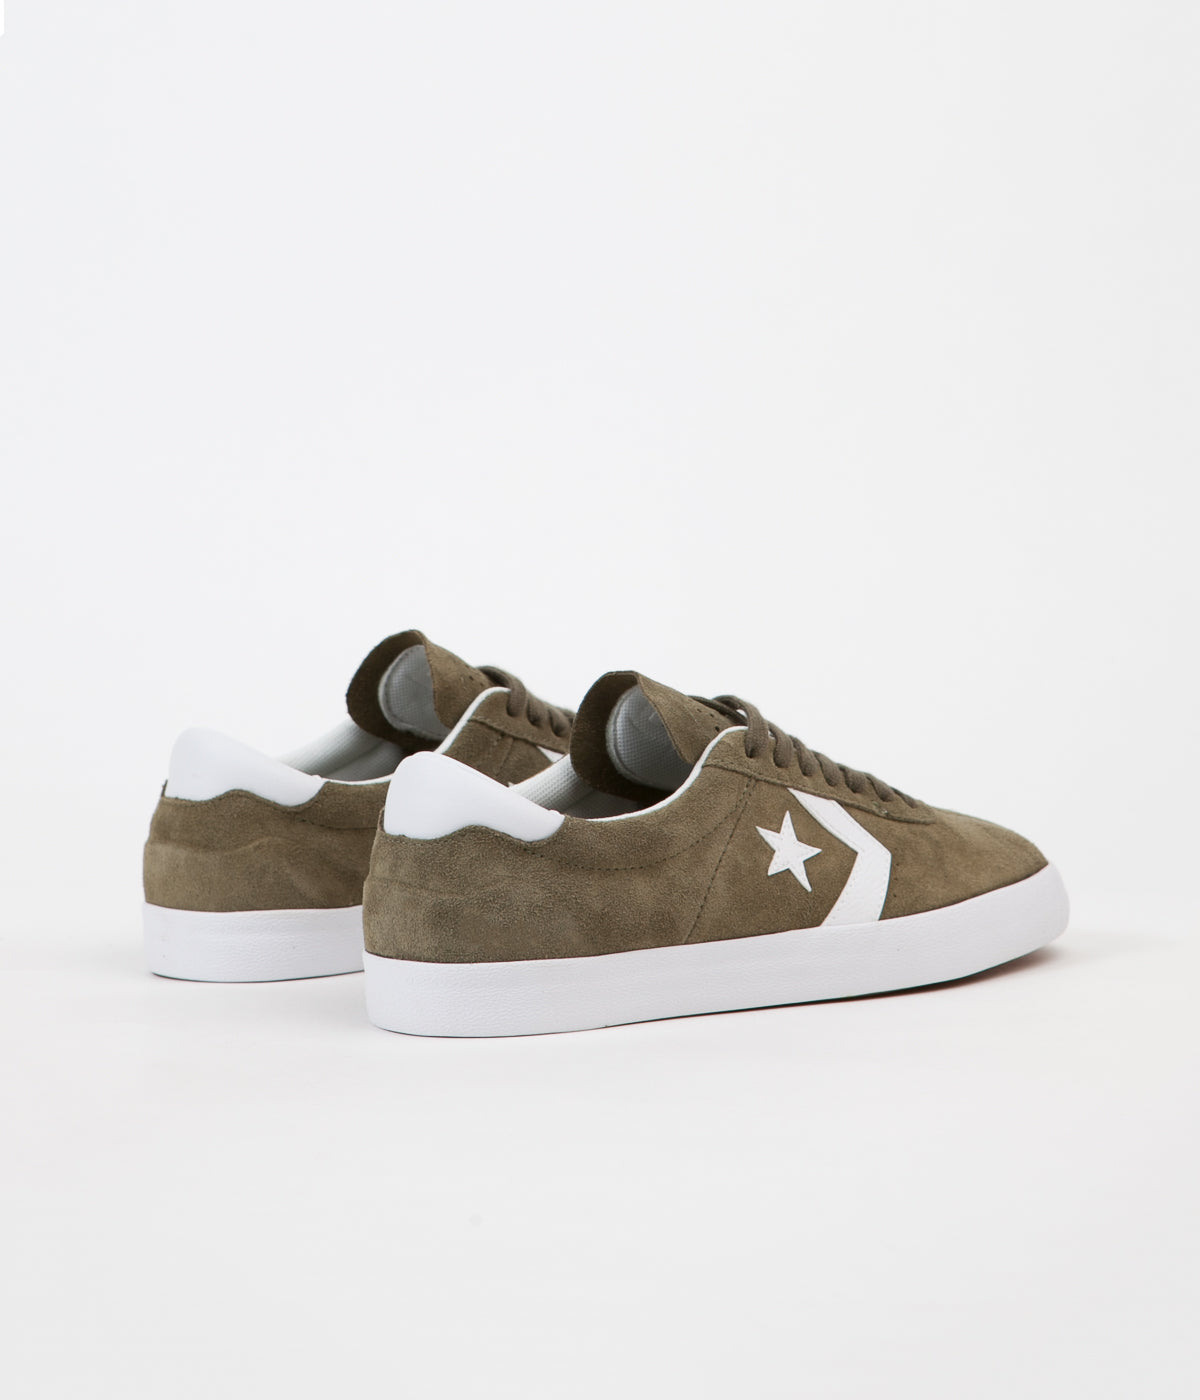 Converse Breakpoint Pro Ox Shoes - Medium Olive / White | Flatspot